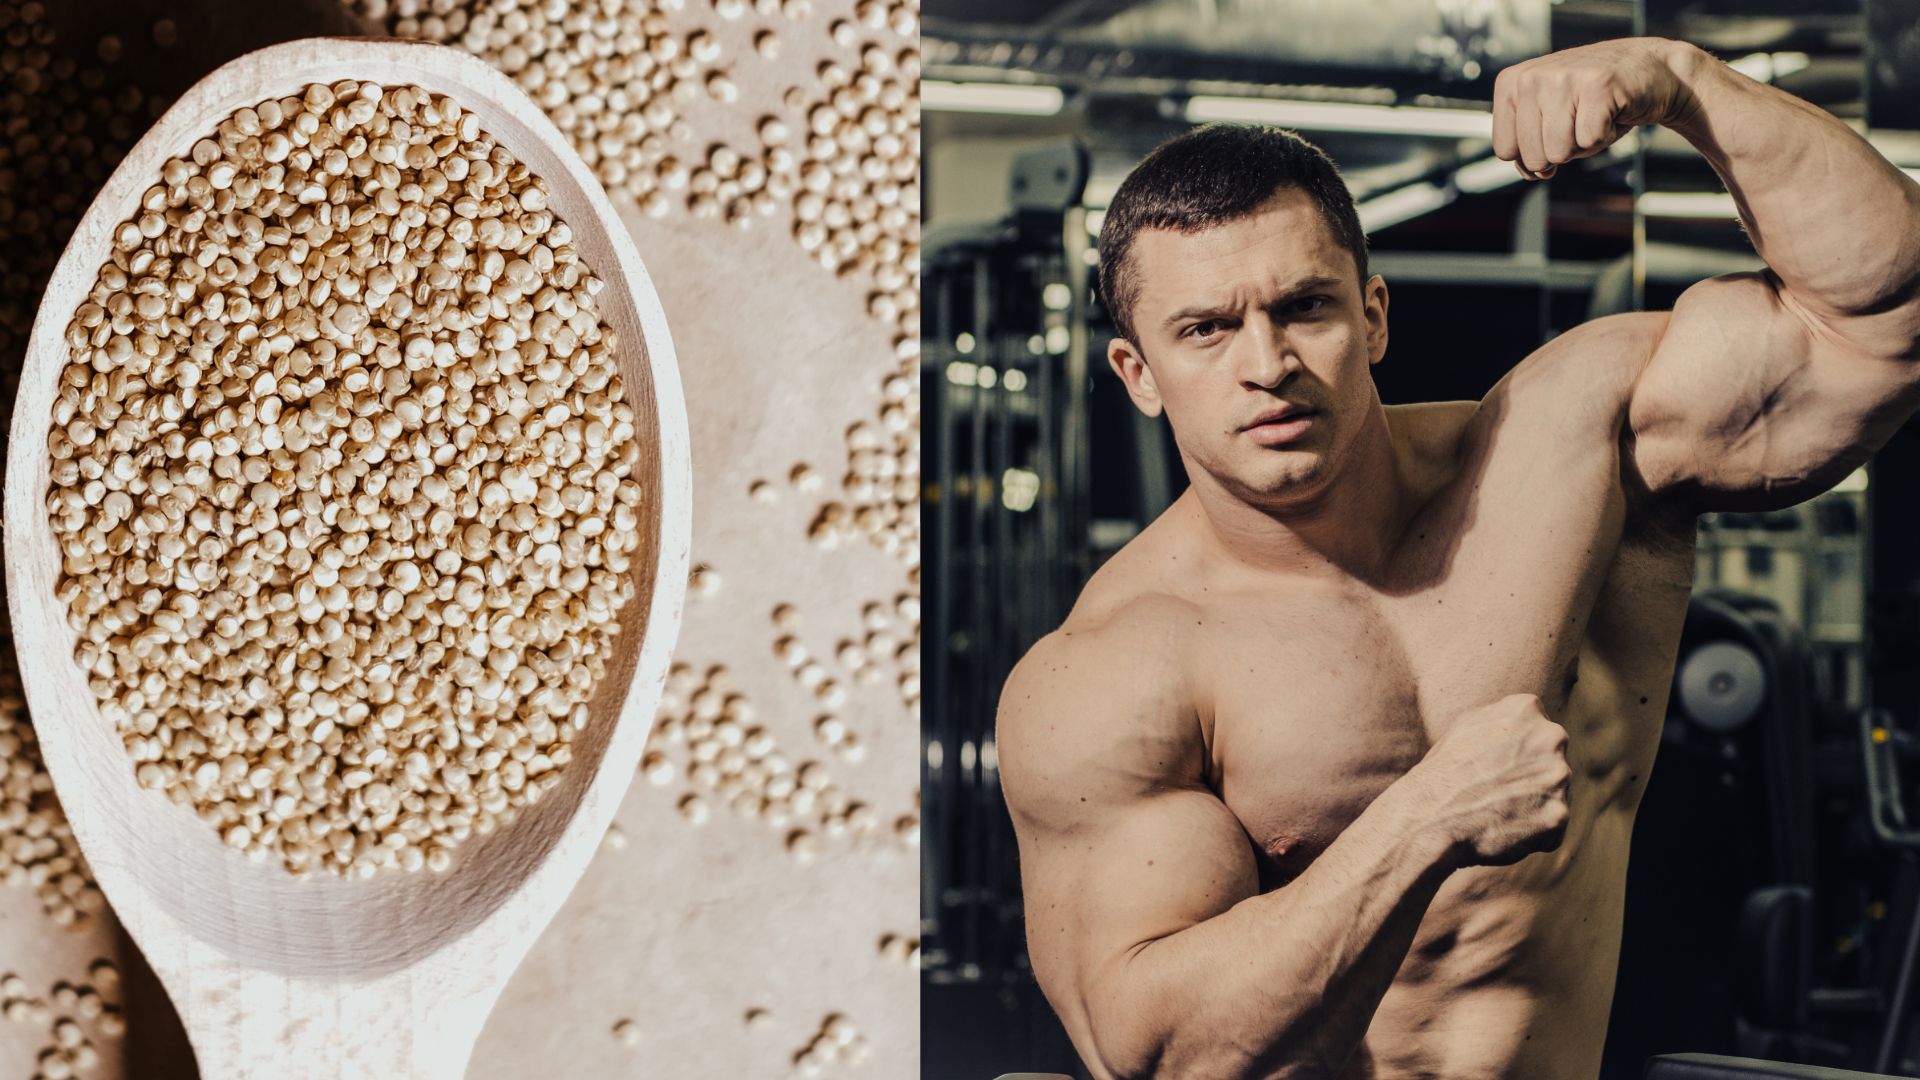 Will Eating More Quinoa Help You Build Muscle While Squatting (Explained)